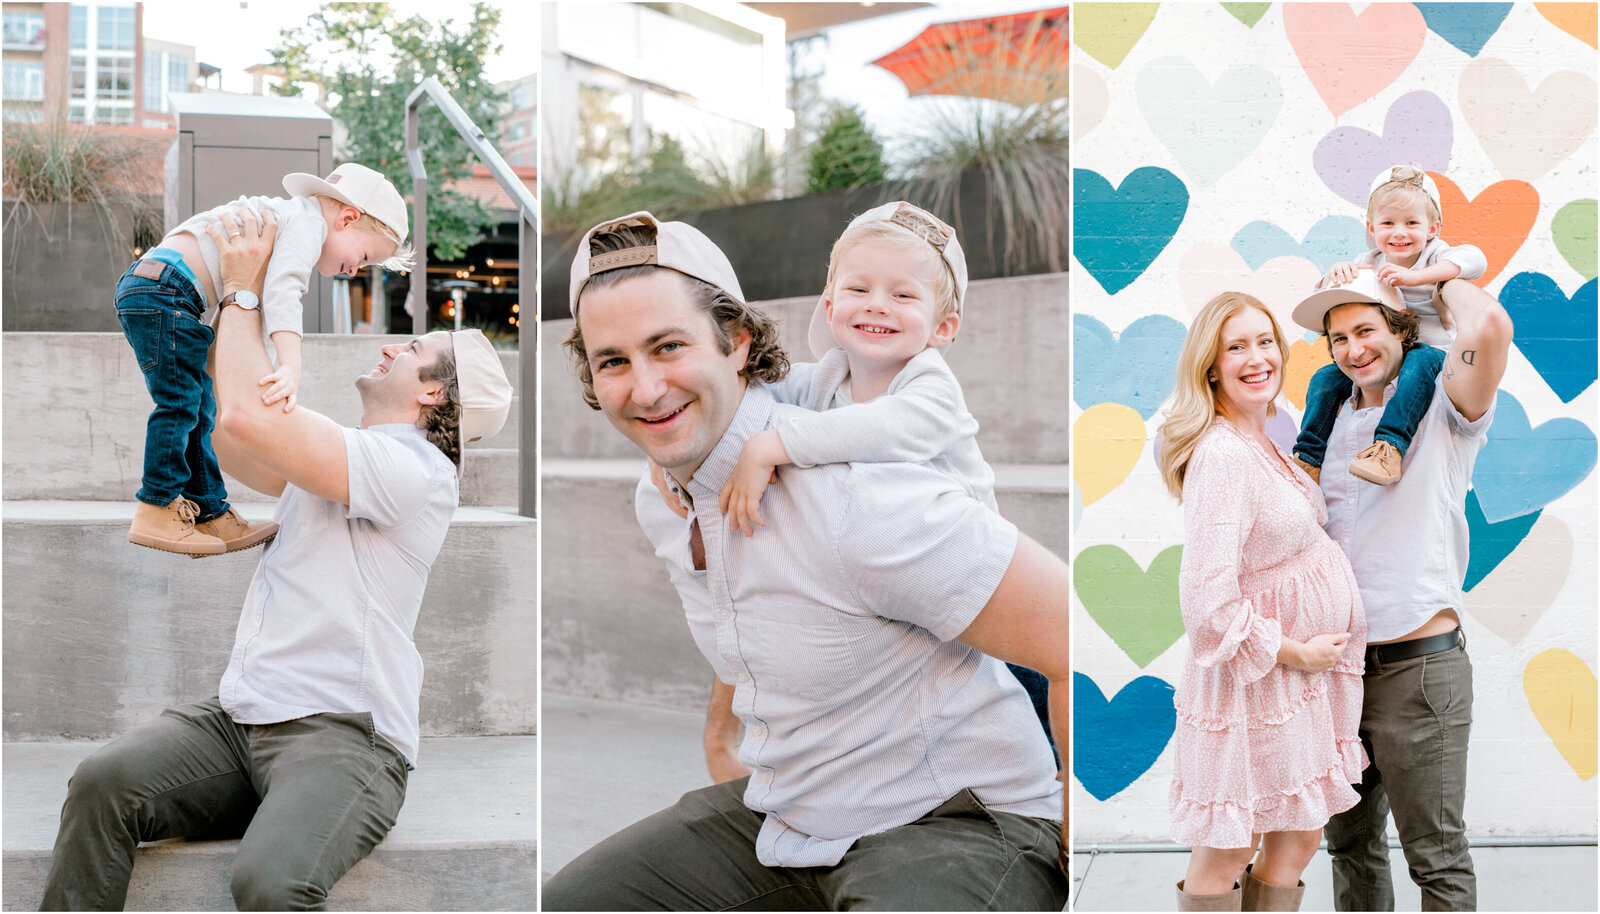 South-End-Family-Session—Uptown-Charlotte-FamilyPhotographer-North-Carolina-Photographer-Alyssa-Frost-Photography-Bright-and-Airy-Photographer-10